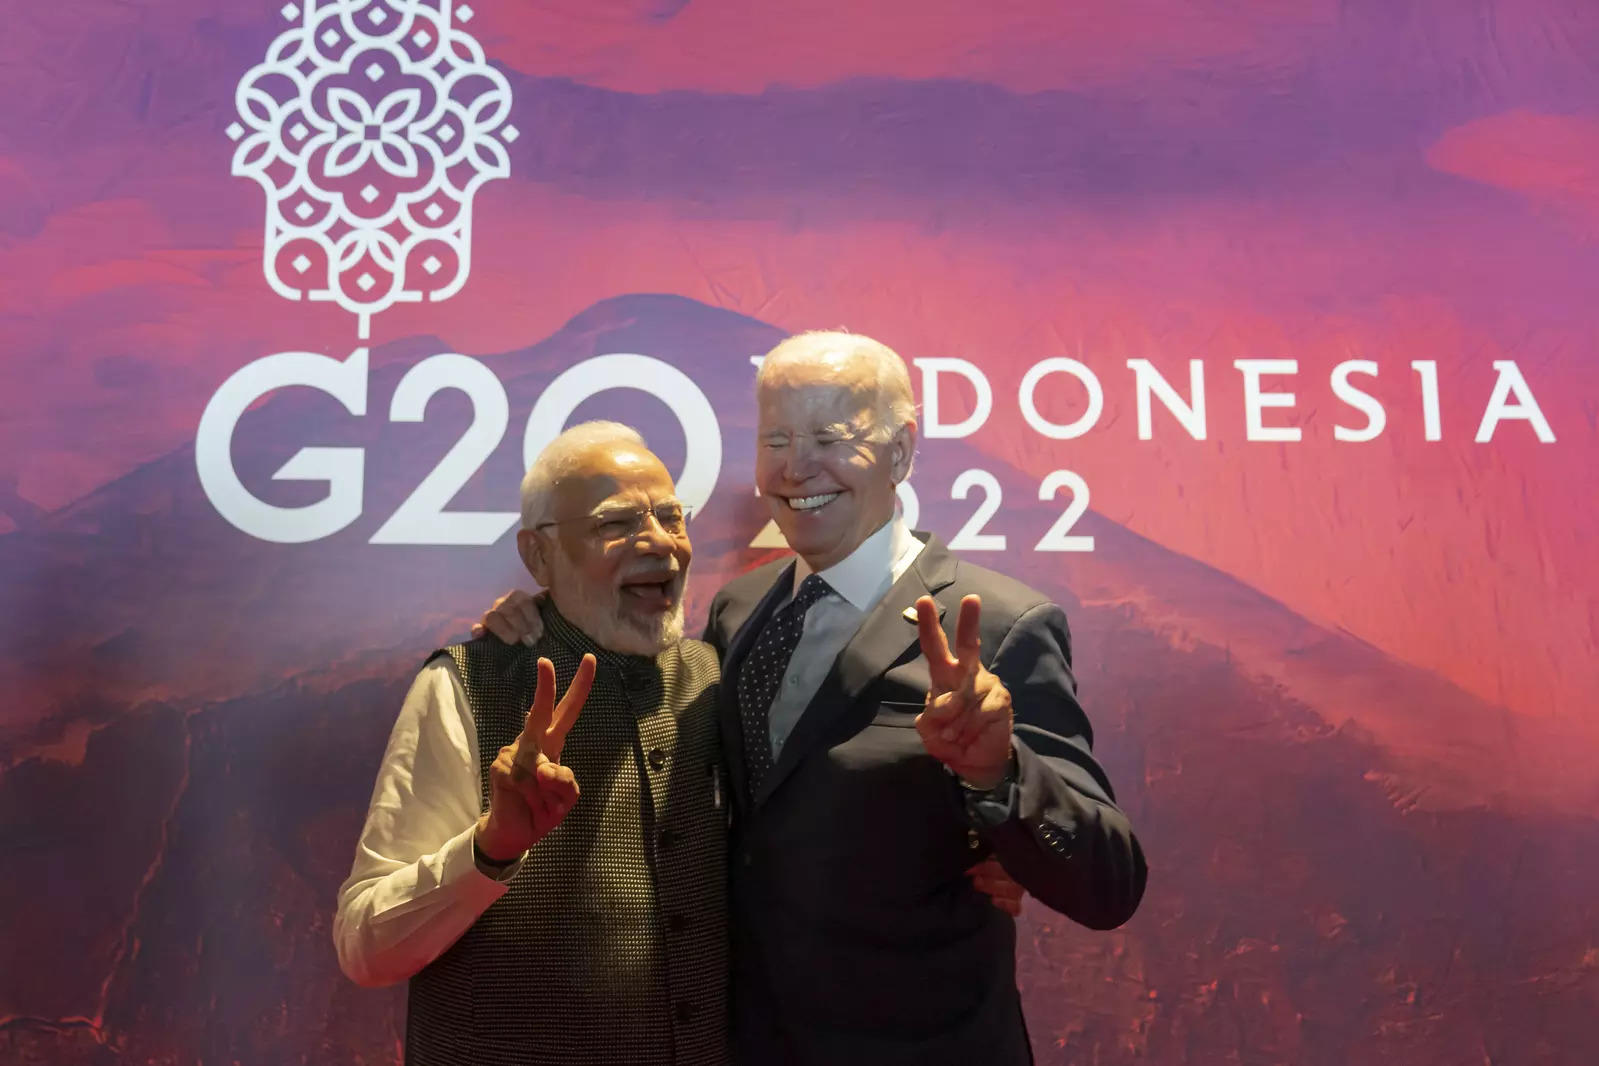 India’s energy transition will transform India and that’s a very good thing for the world